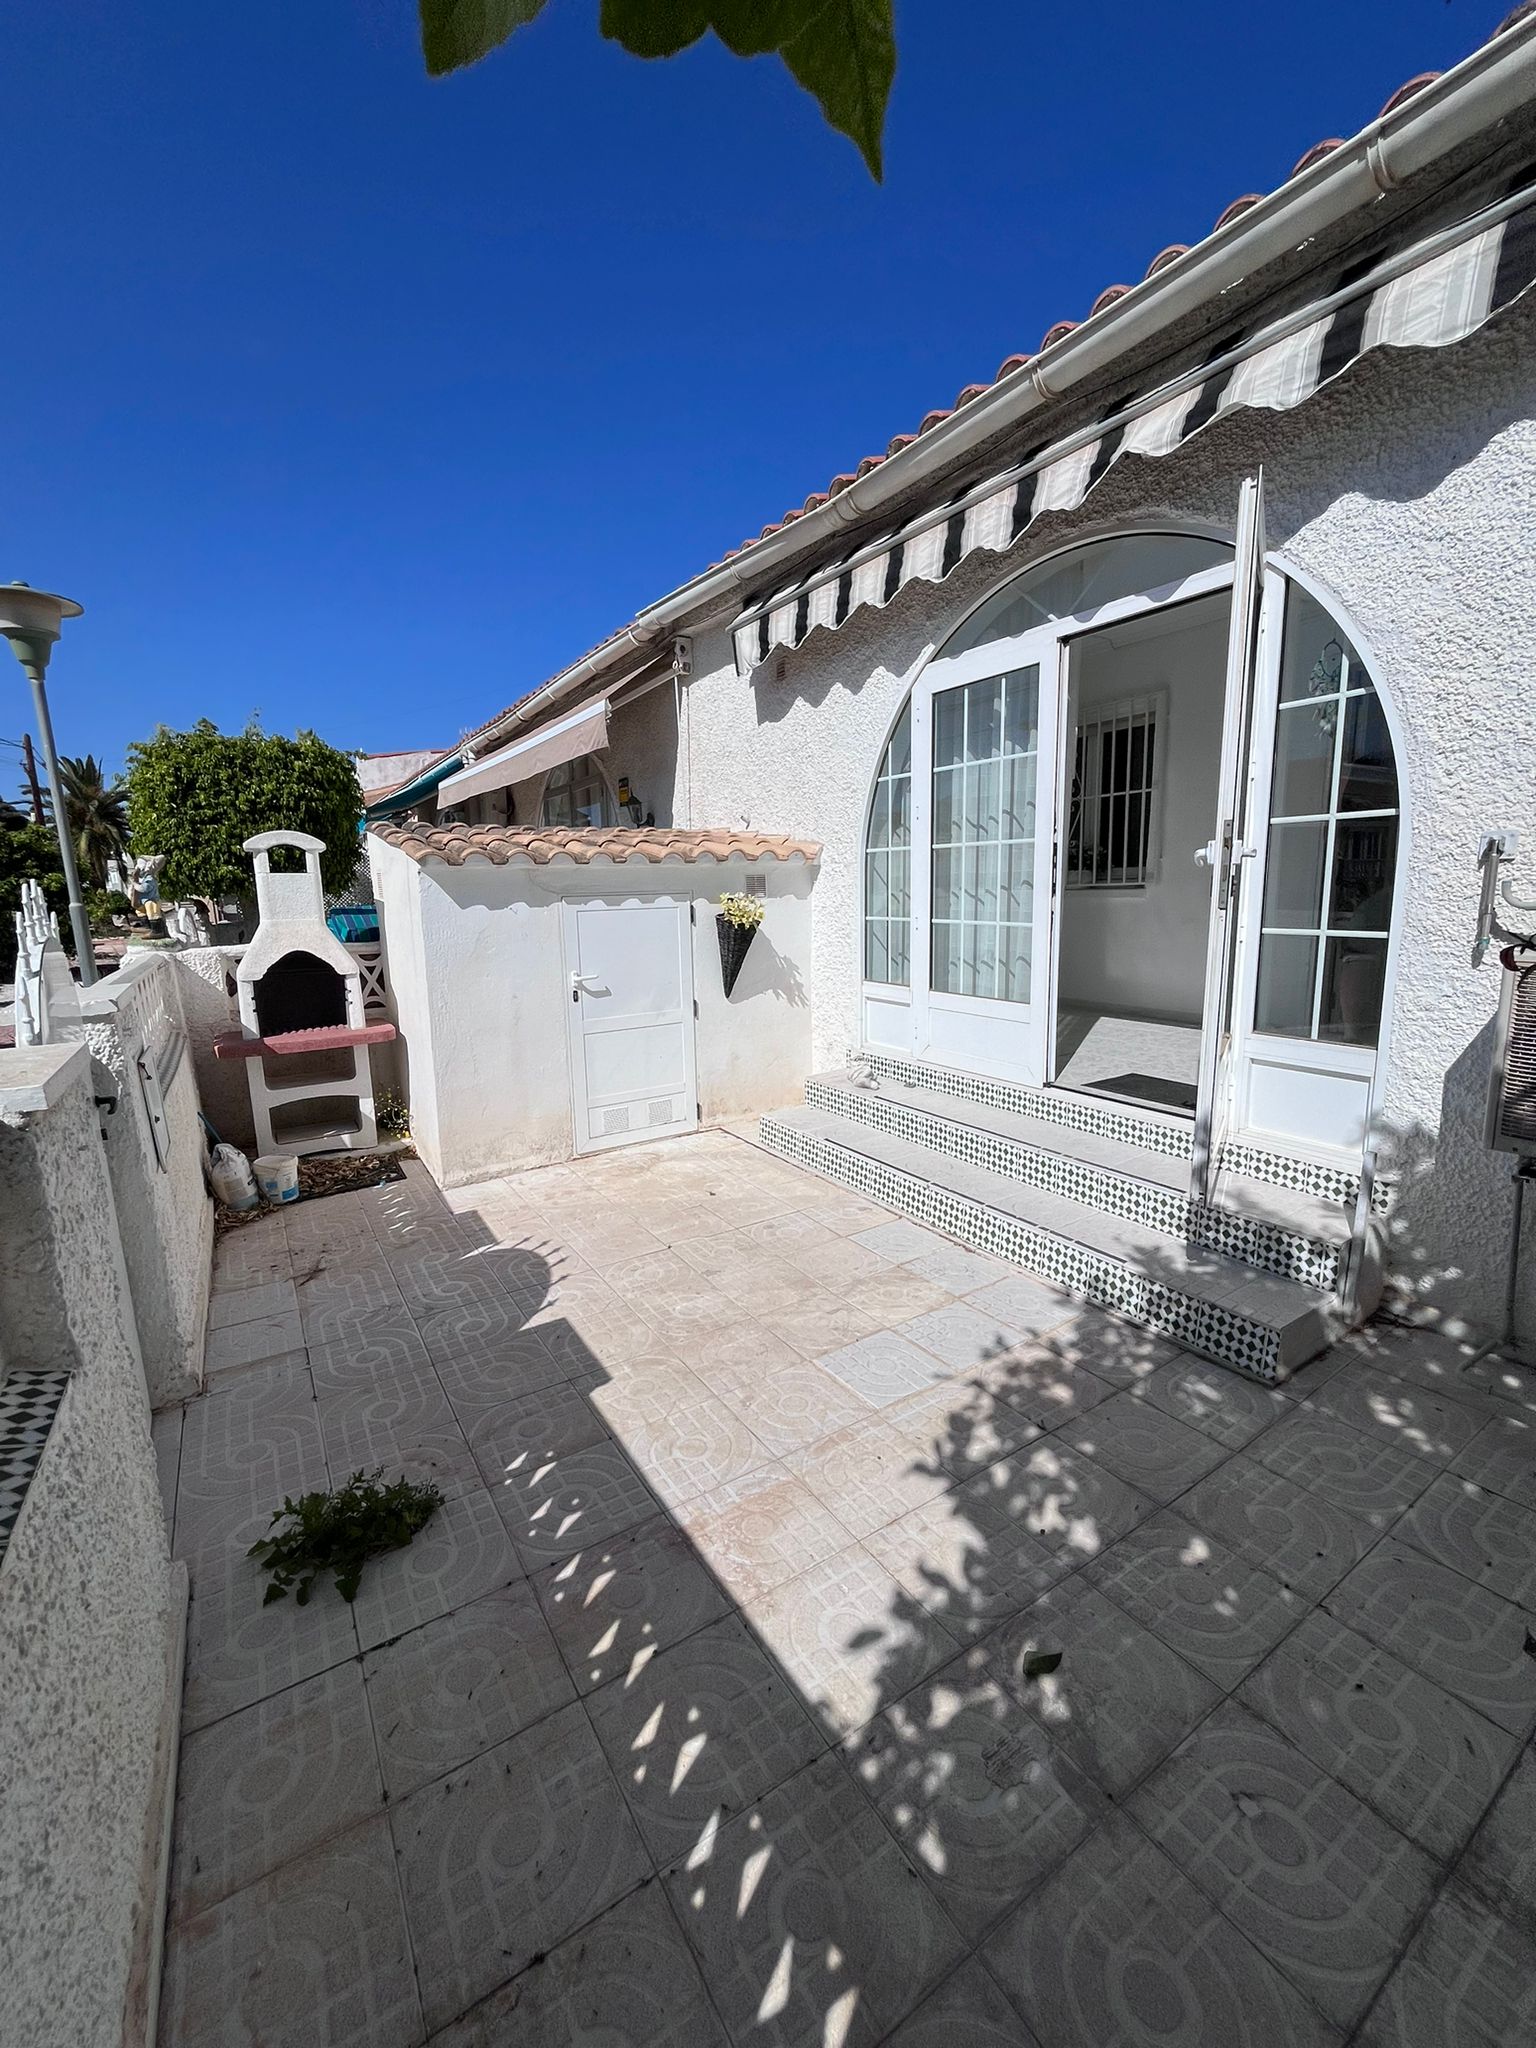 2 Soverom bungalow in Torrevieja bungalow Torrevieja